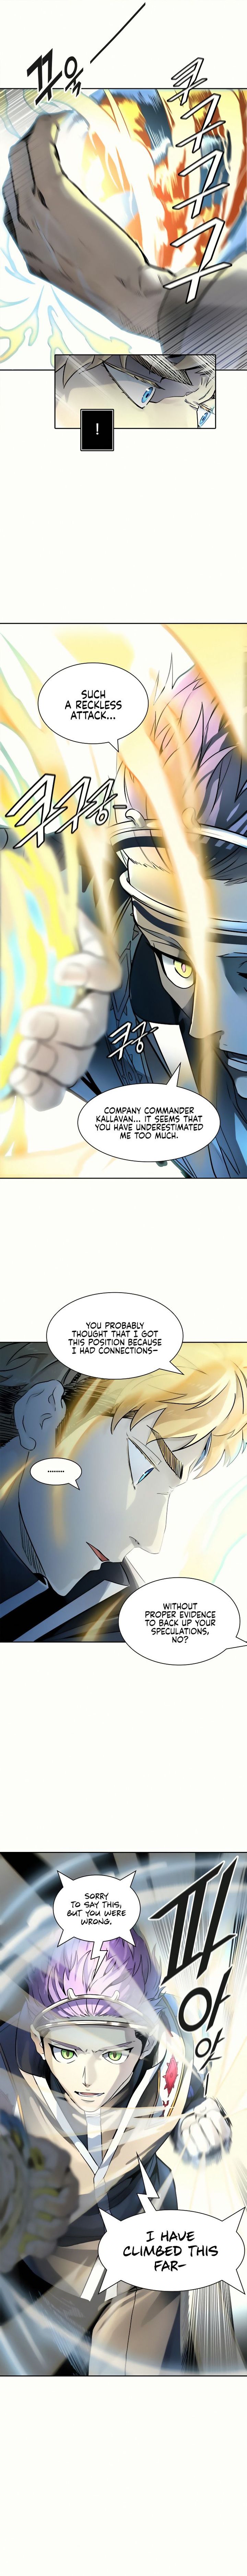 Tower Of God 521 10